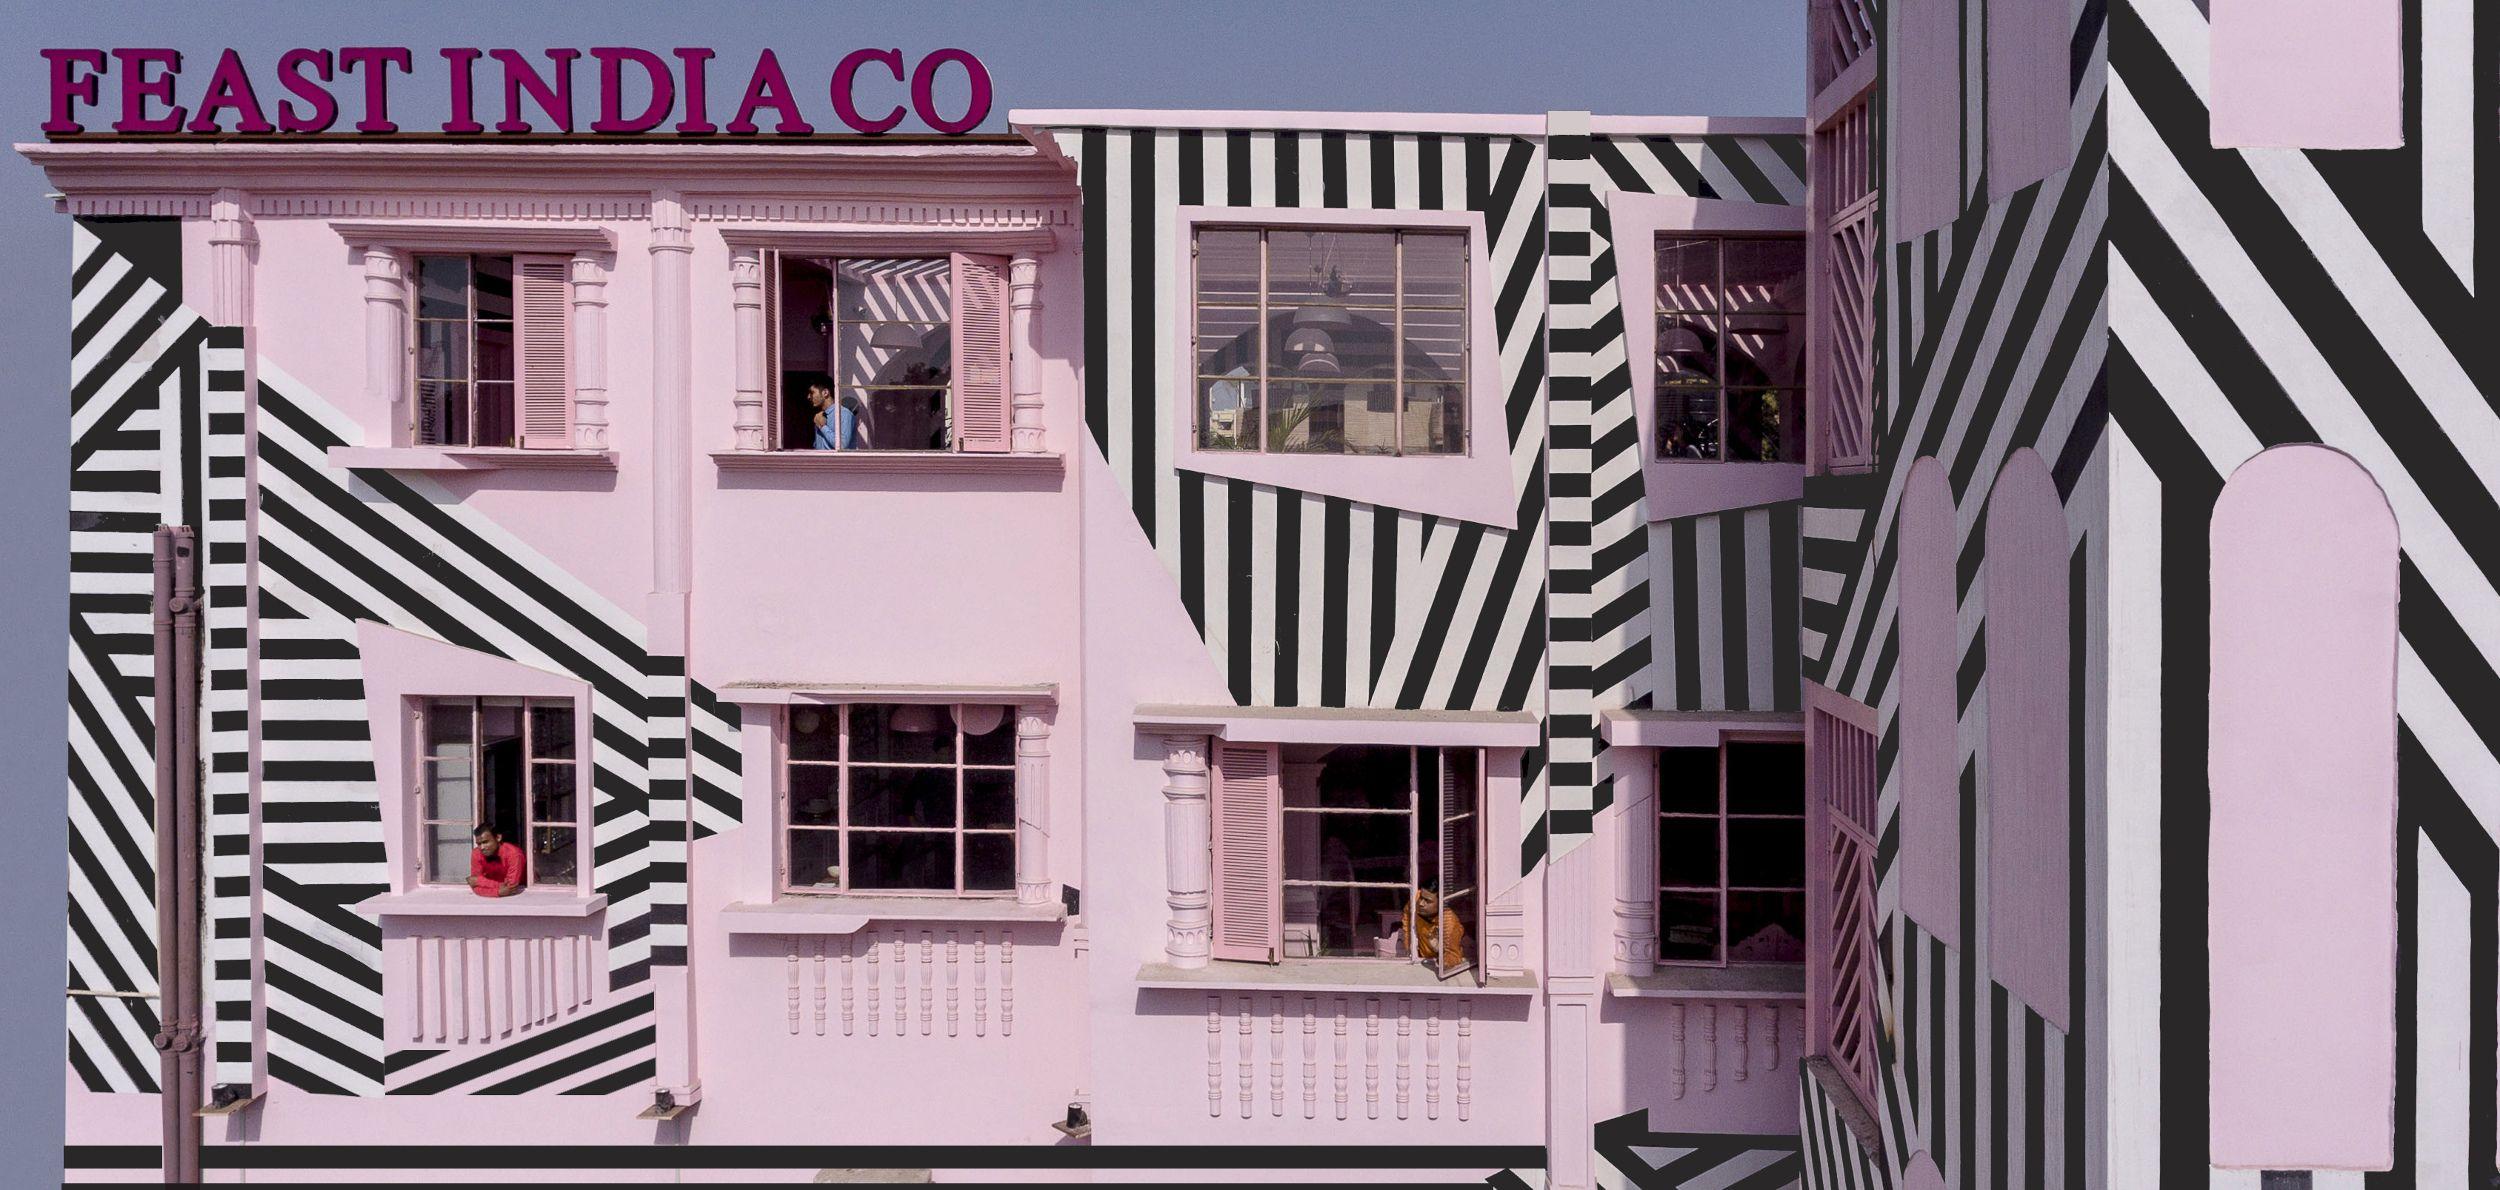 Pink Zebra Company Logo - The Wes Anderson Inspired Restaurant In India Decorated Like A Pink